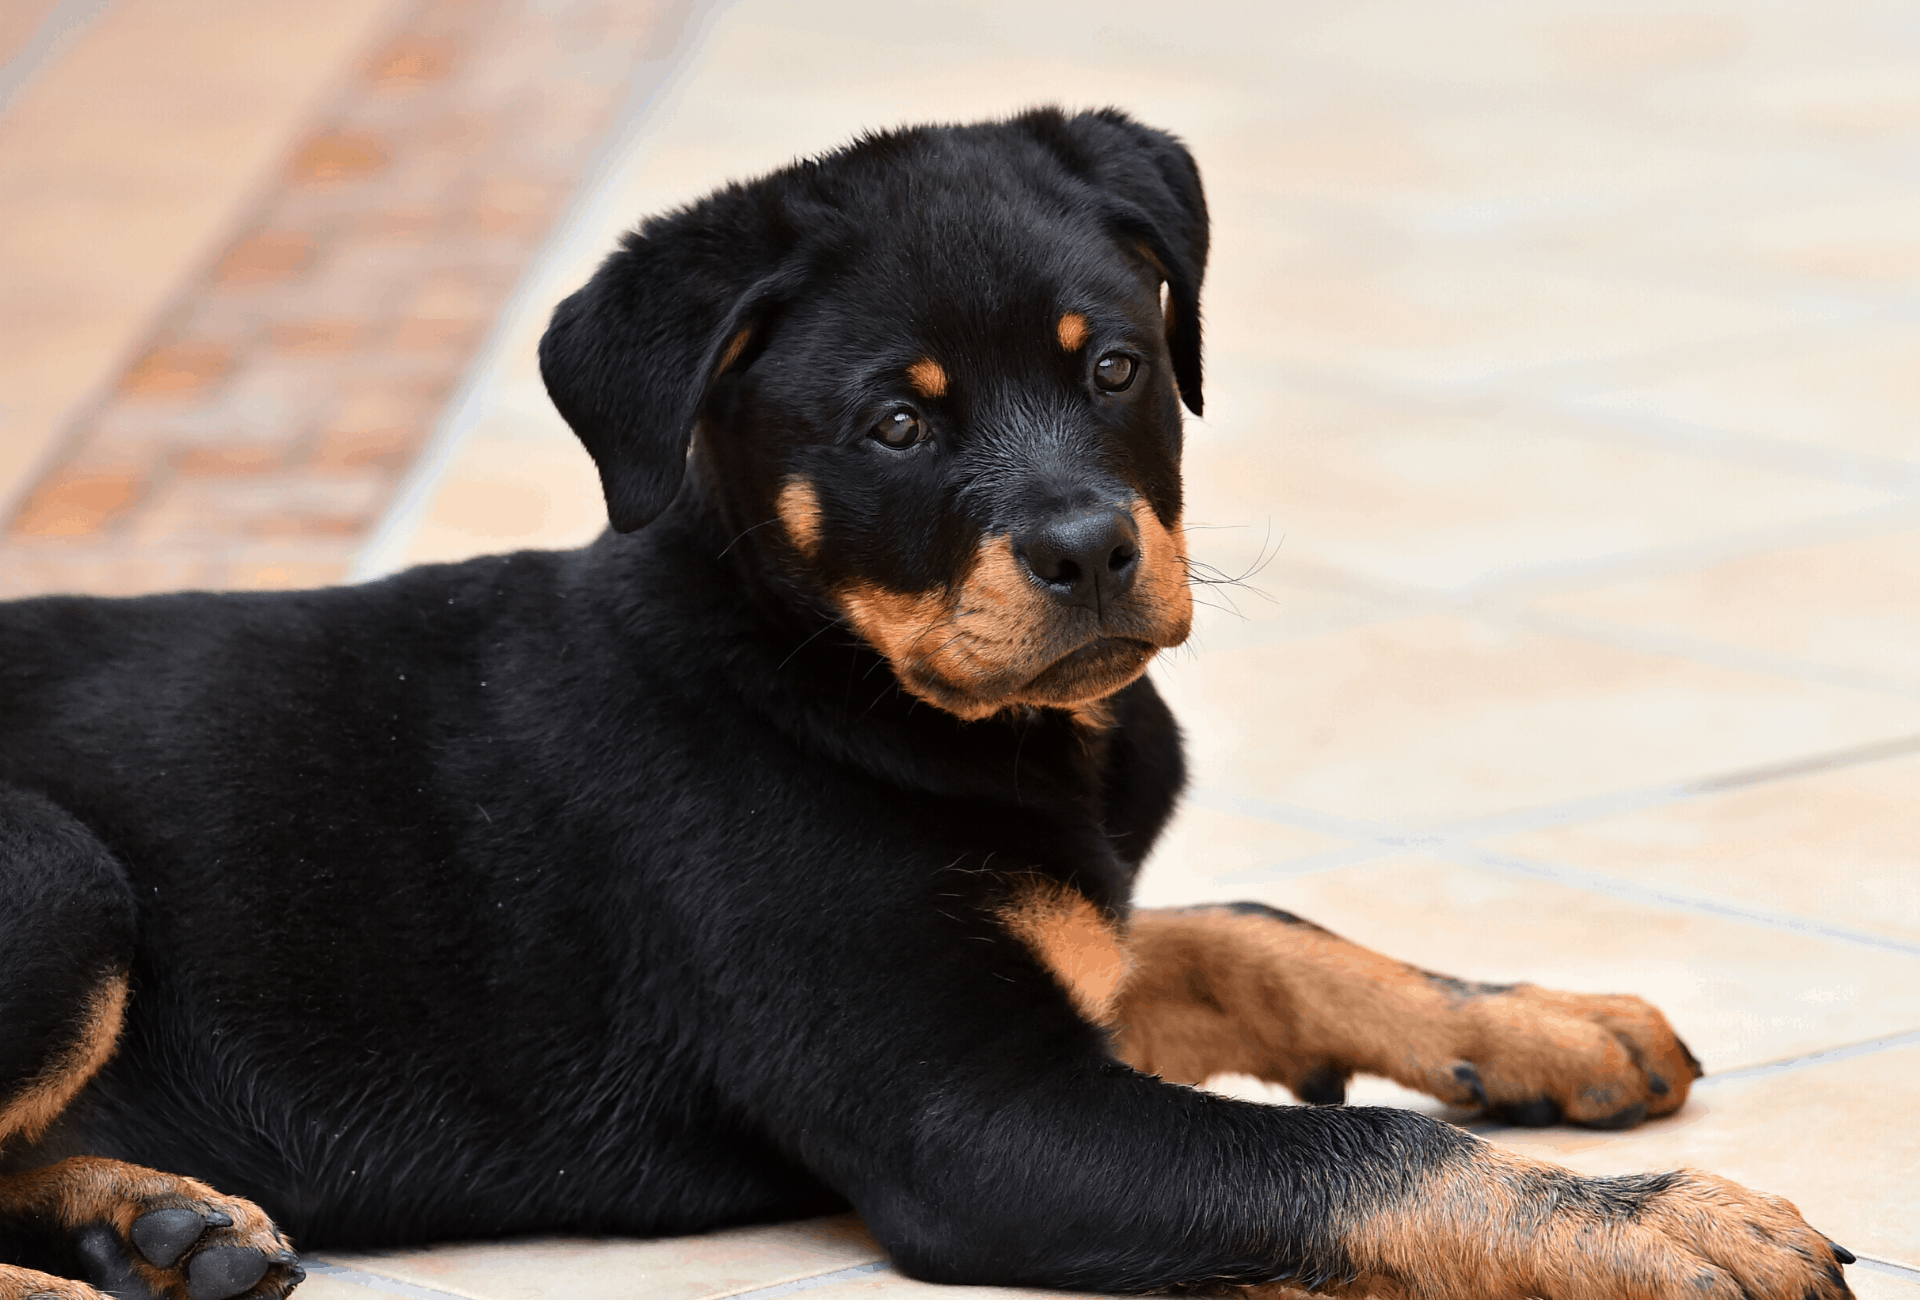 Black and tan Rottweiler puppy with markings that are too light.